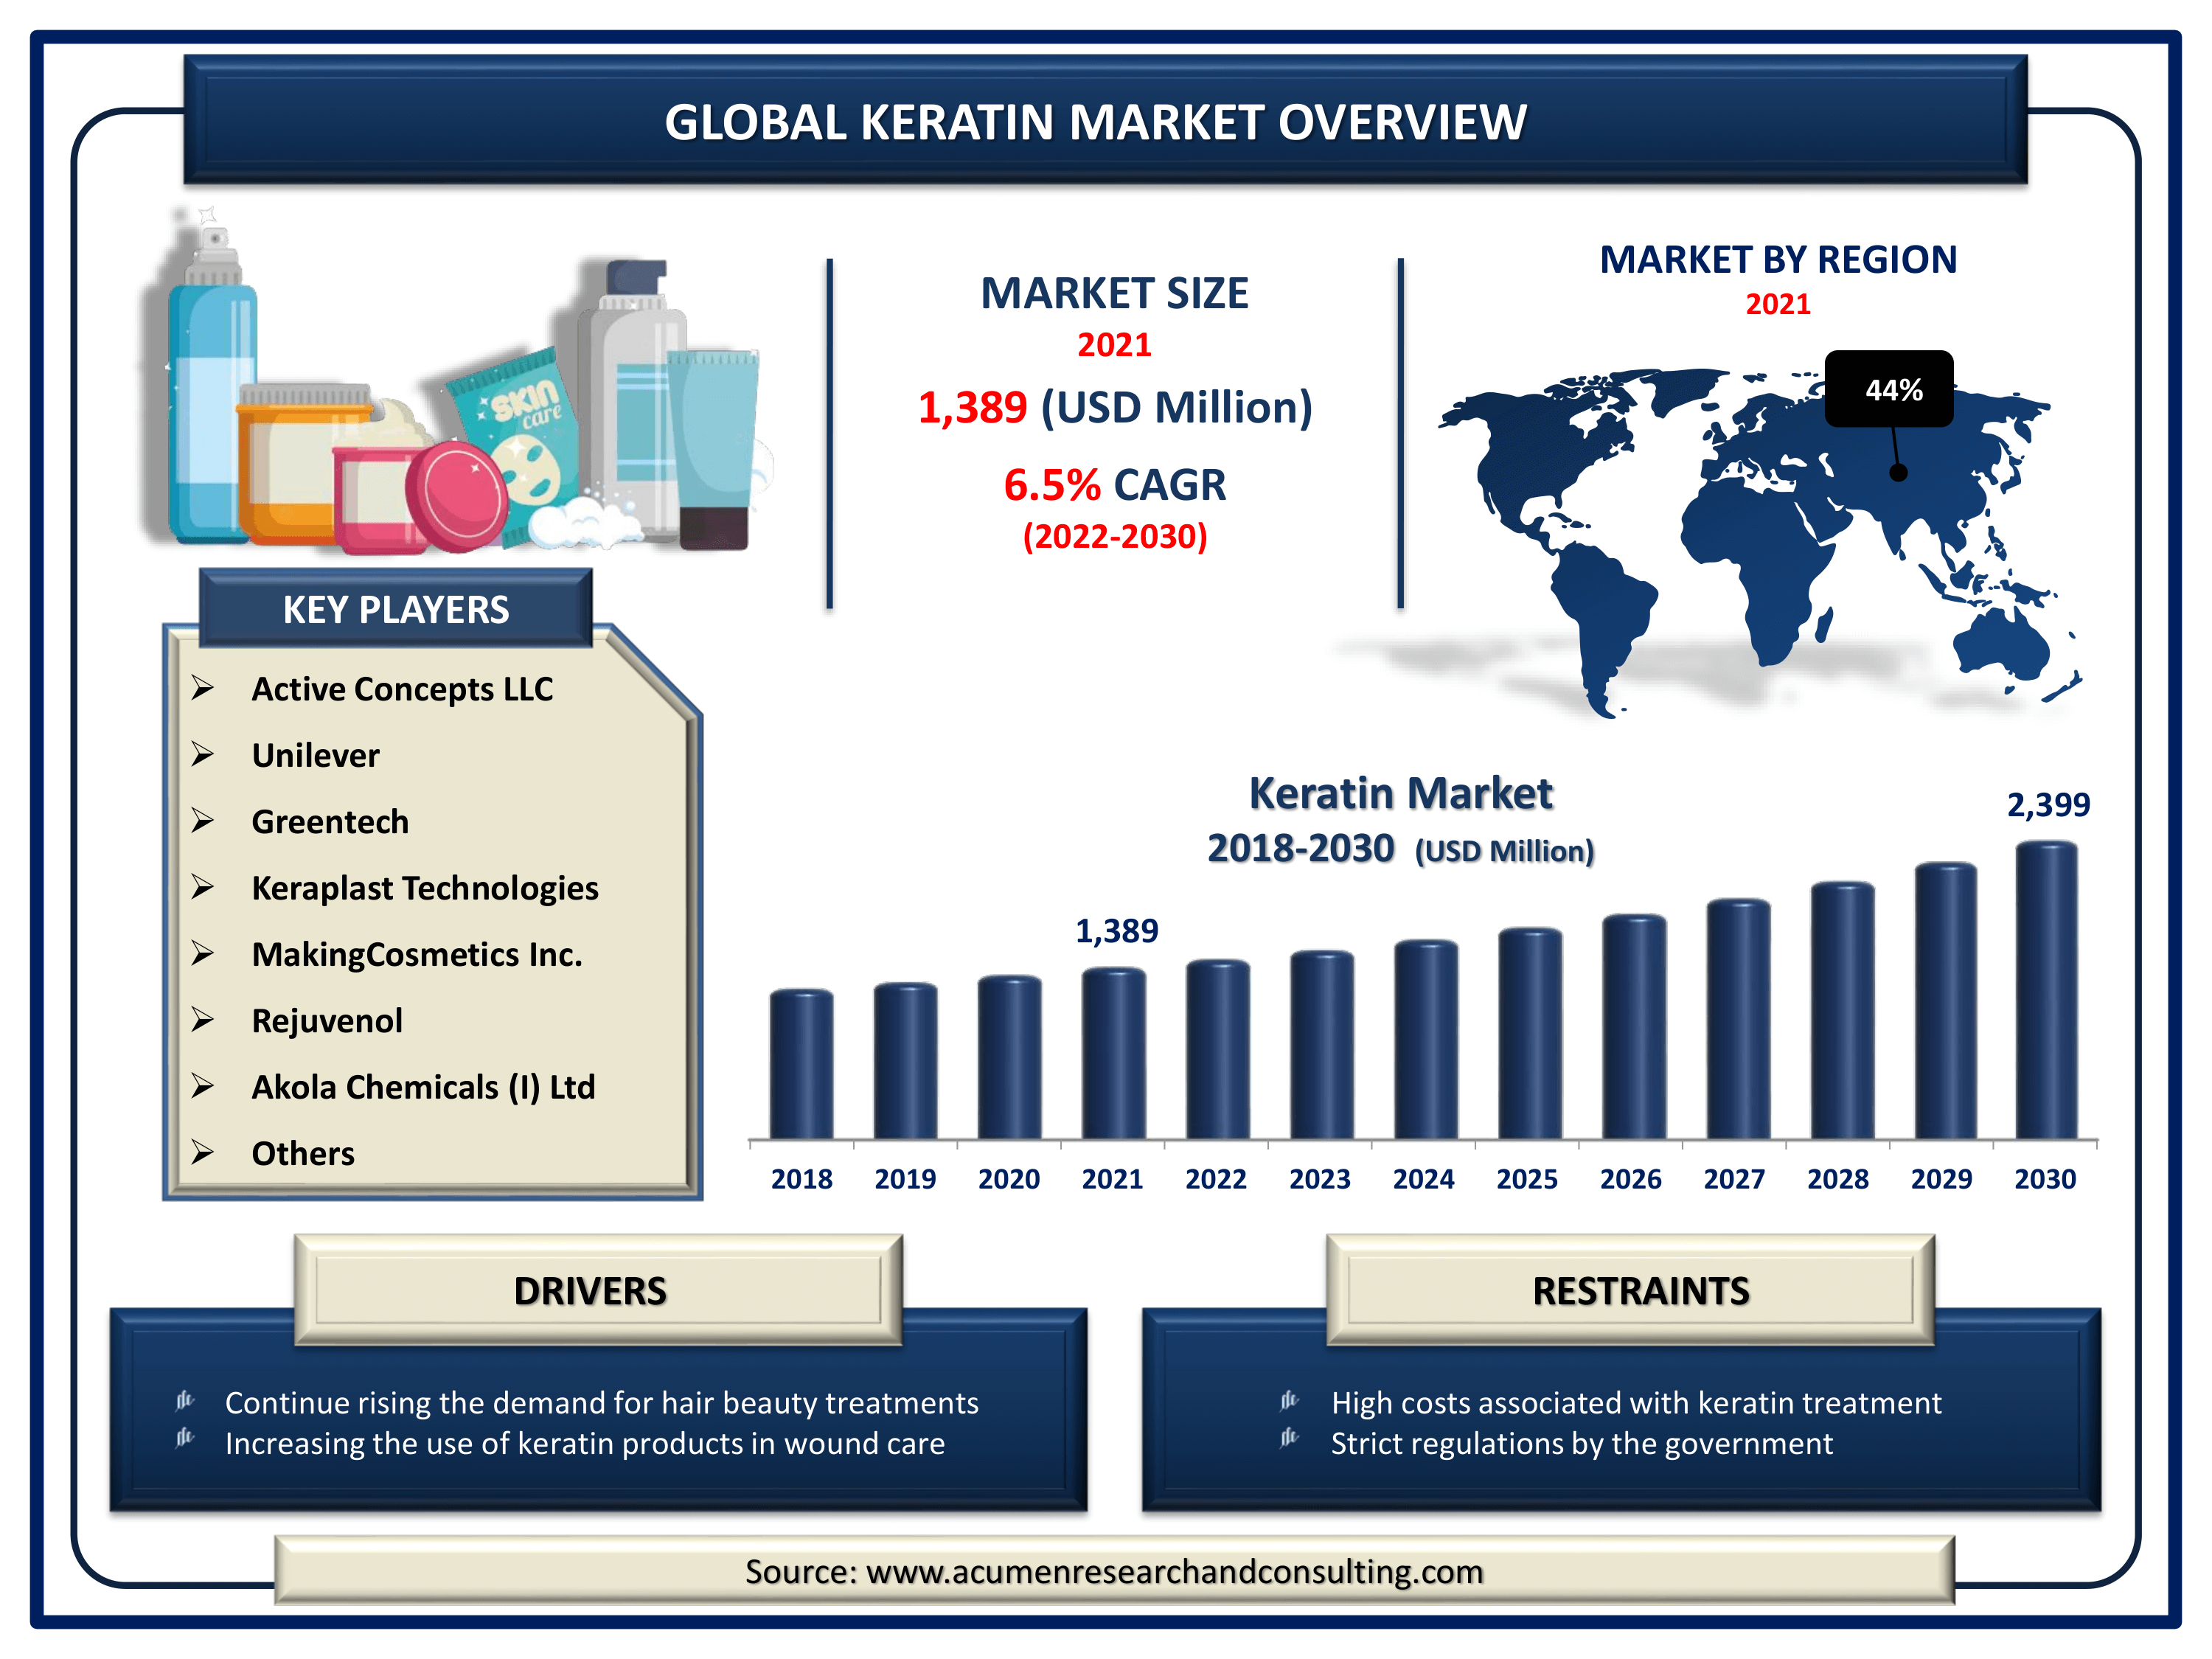 Global Cosmetics Market Size, Share, Growth